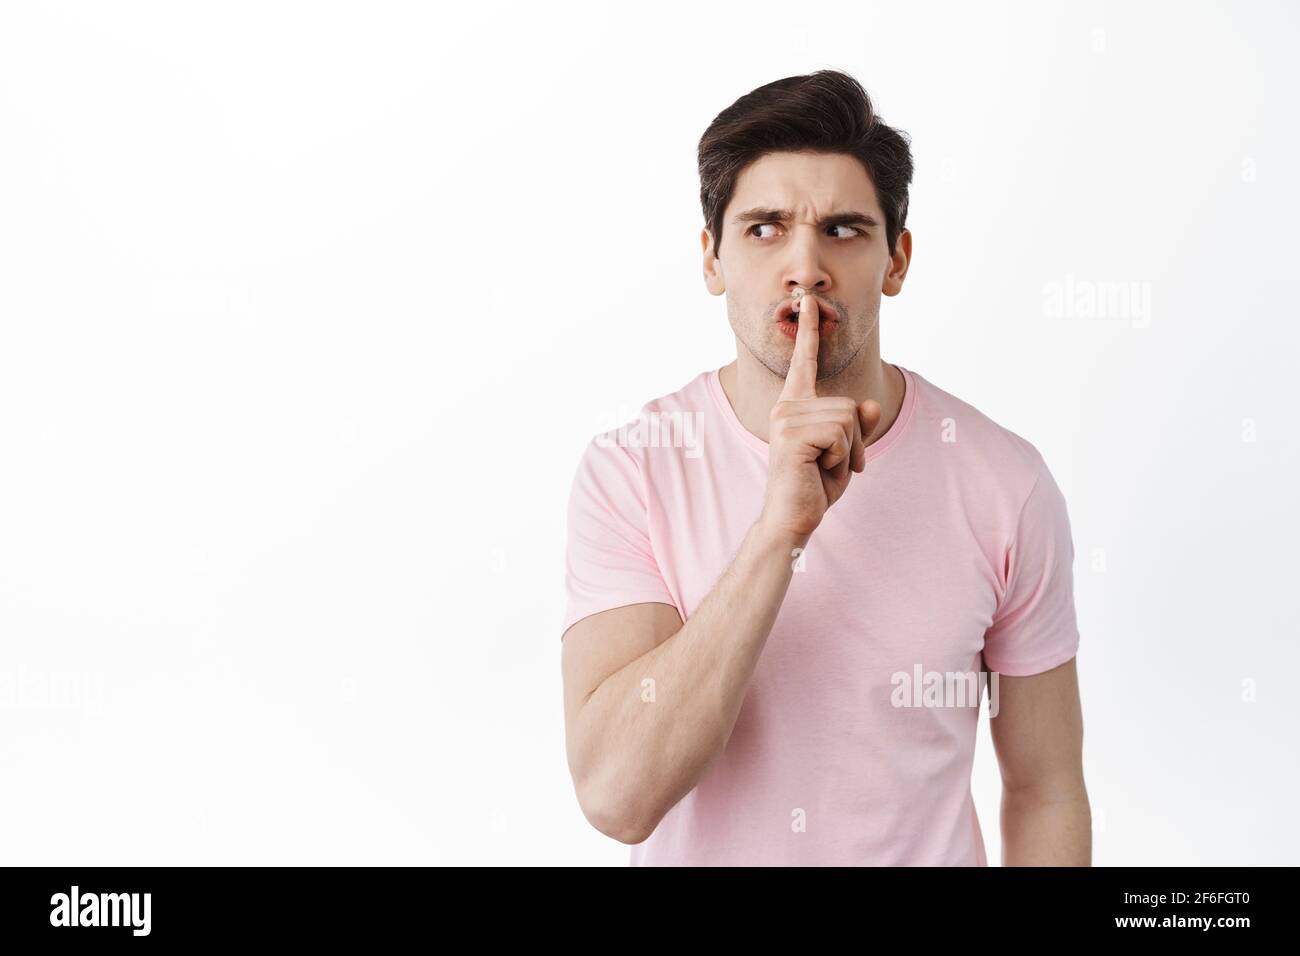 Angry suspicious man looks aside and shushing, tell to shut up, be quiet, need silence, show taboo gesture, standing over white background Stock Photo